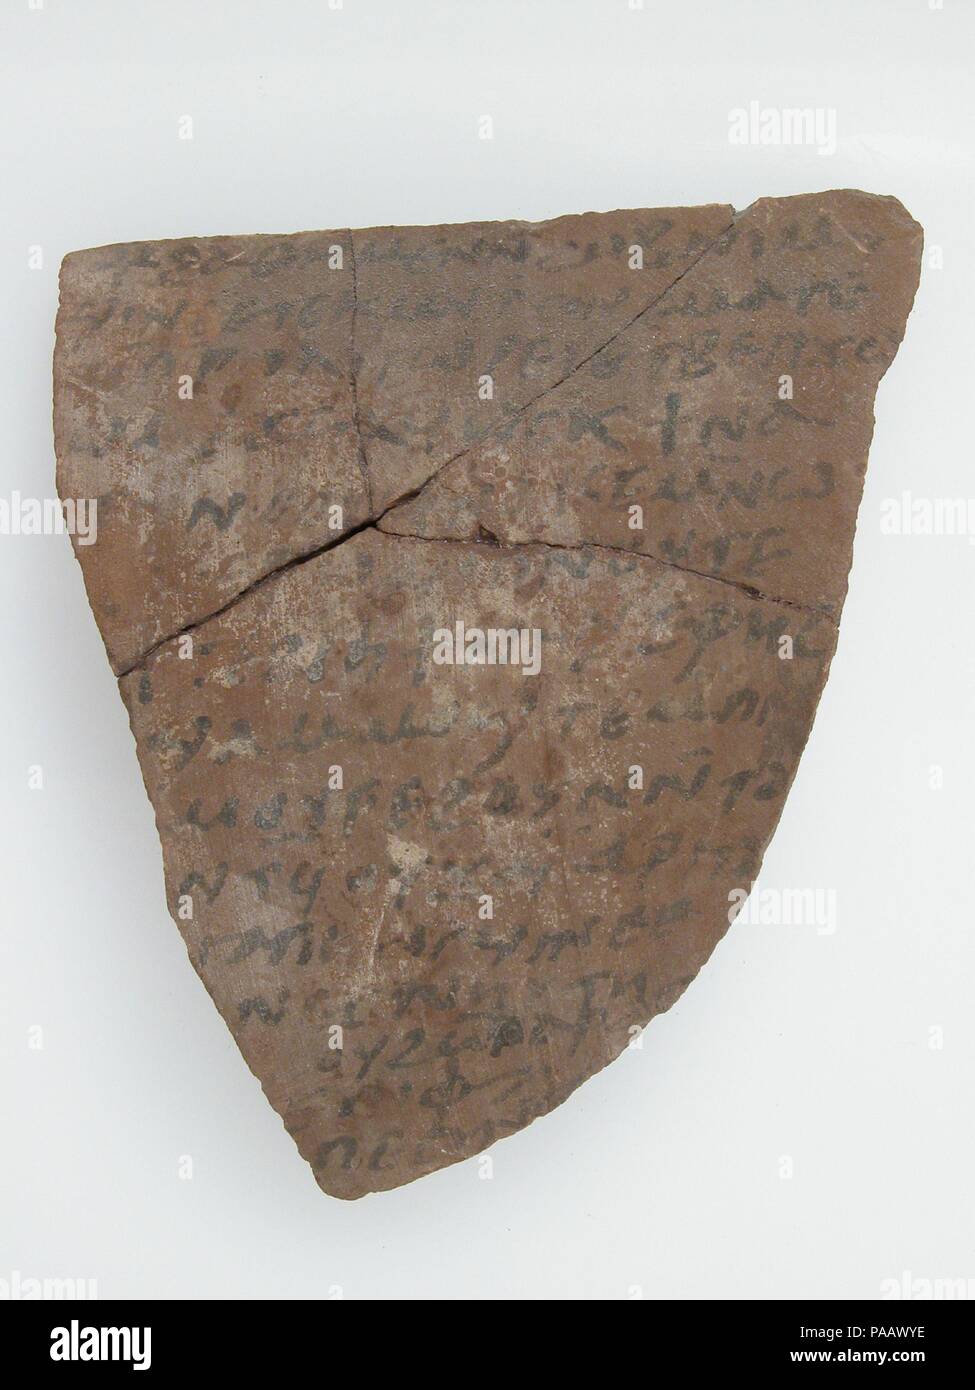 Ostrakon with a Letter from Pesenthius to Epiphanius. Culture: Coptic. Dimensions: 4 7/16 x 3 7/8 in. (11.2 x 9.8 cm). Date: 600. Museum: Metropolitan Museum of Art, New York, USA. Stock Photo